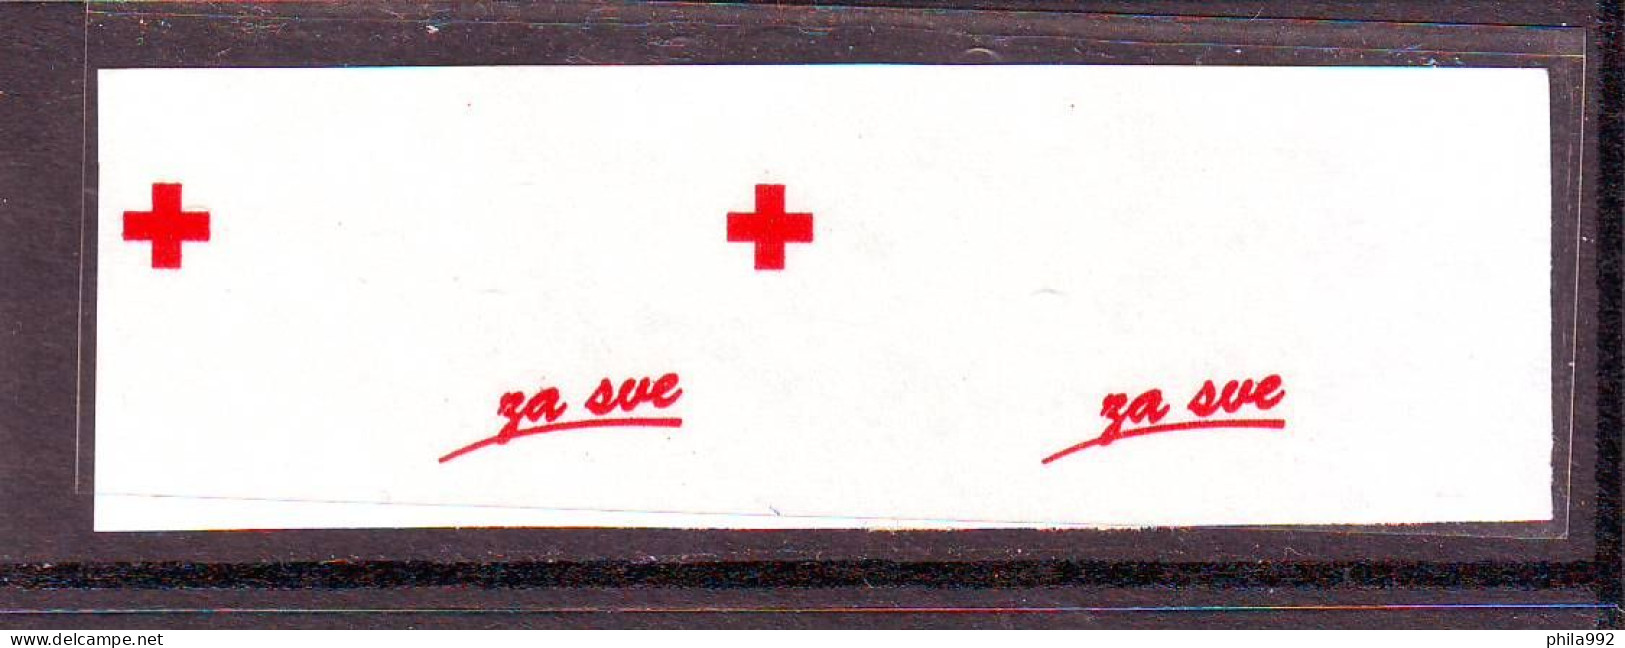 Croatia 1993 Charity Stamp Mi.No. 26 RED CROSS  Imperforate Pair Without Black Color    MNH - Croatia